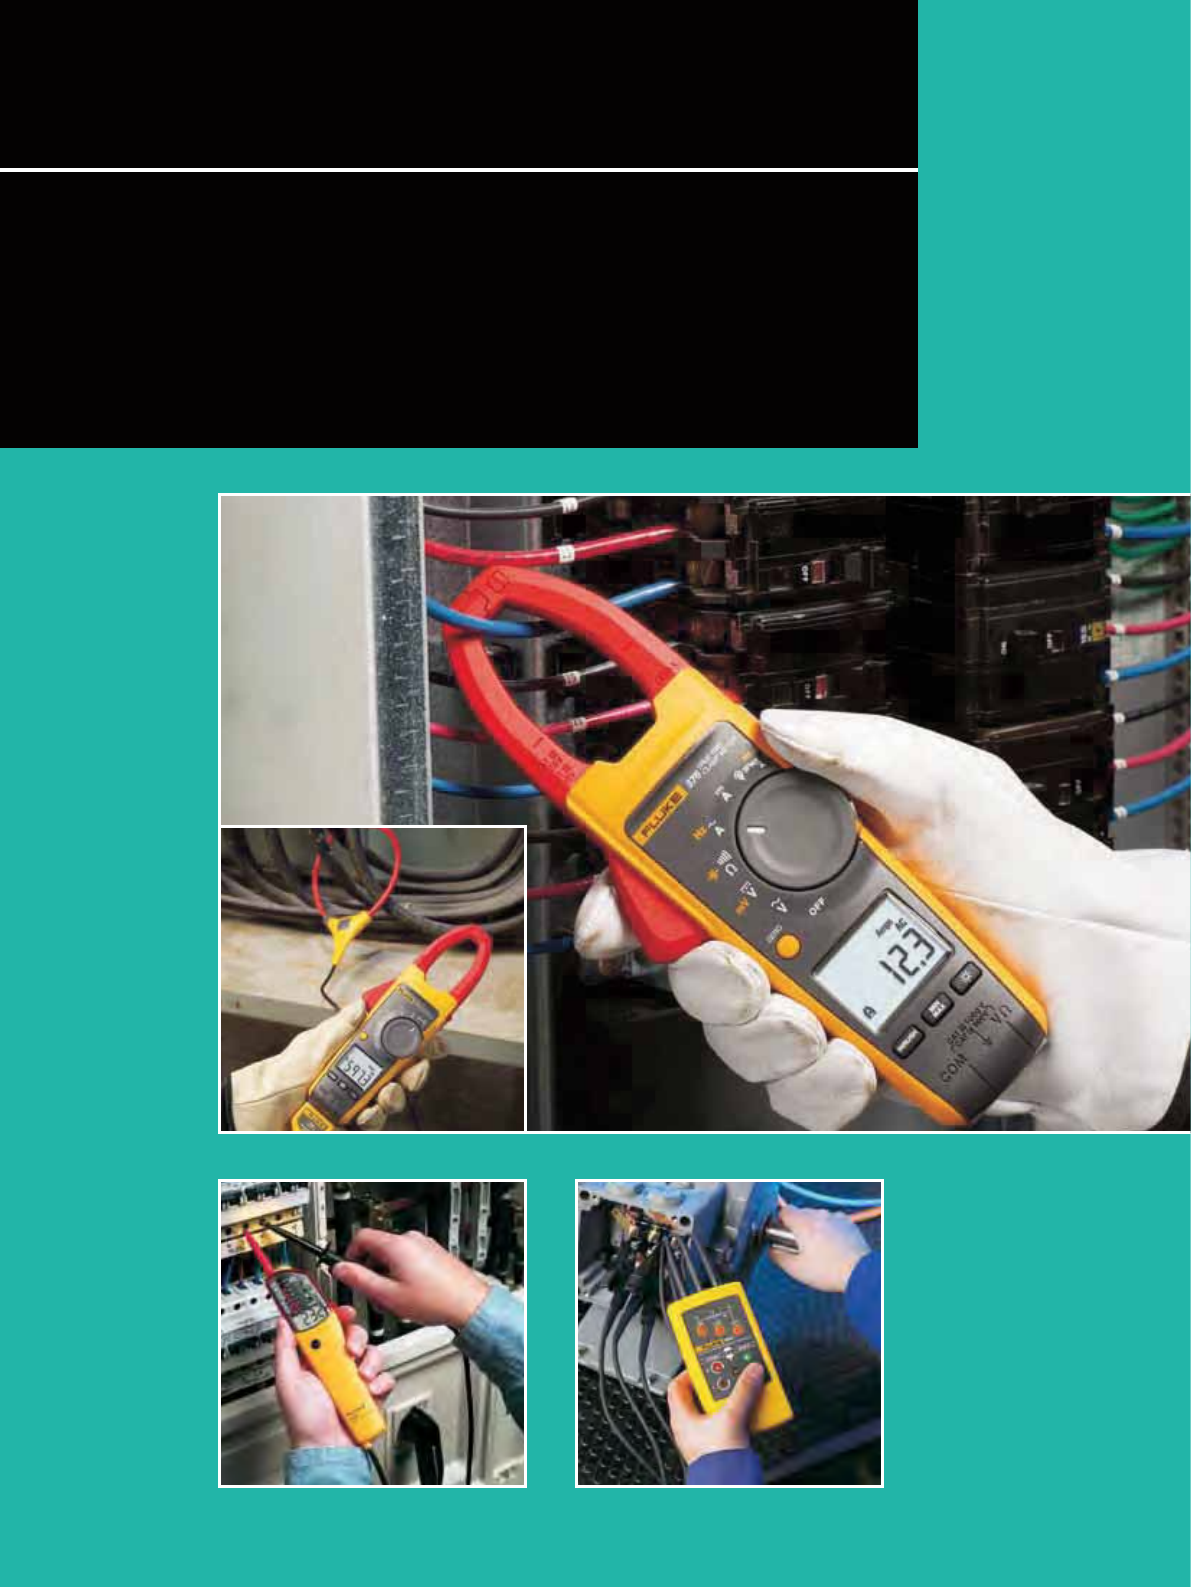 Jaw Size Diameter 68mm With USB Interface Data Upload Function Data Storage 99 Group Flexible high current clamp meter Clamp Ammeter DC/AC Current Measurement Range DC 0.0A to 2000A AC 0.0A to 1500A 